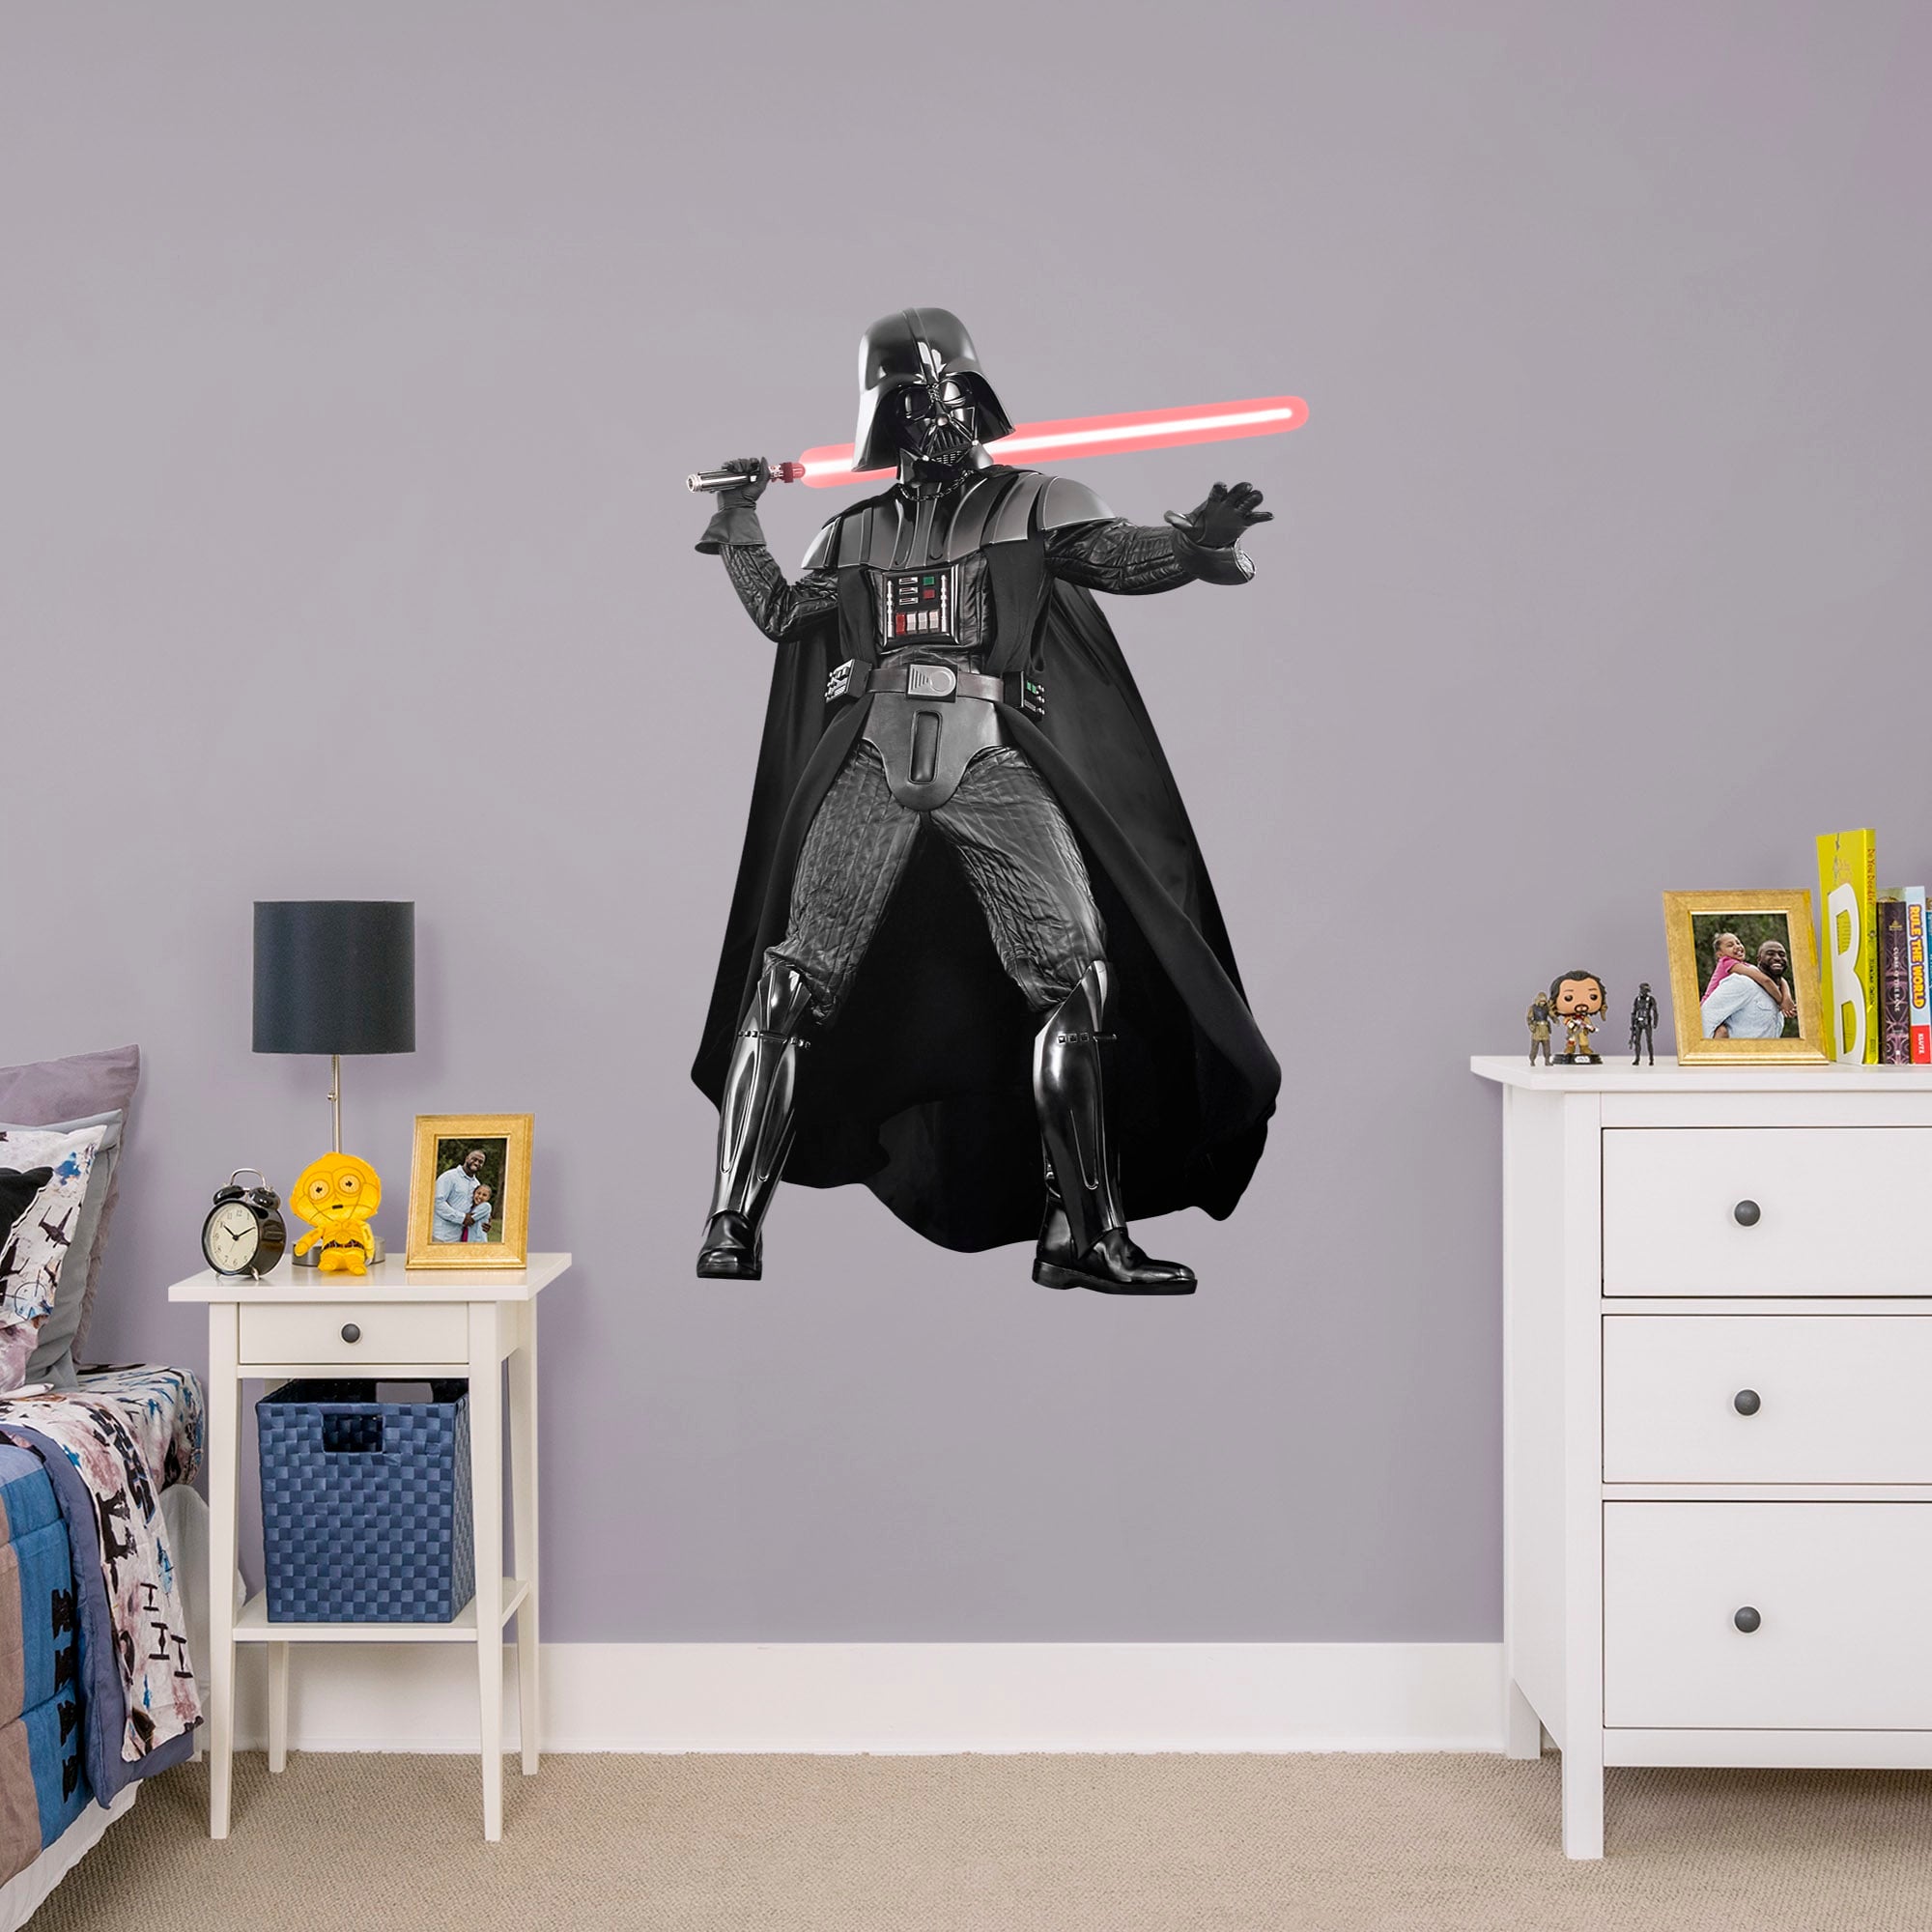 Darth Vader - Officially Licensed Removable Wall Decal Giant Character + 2 Decals (32"W x 51"H) by Fathead | Vinyl